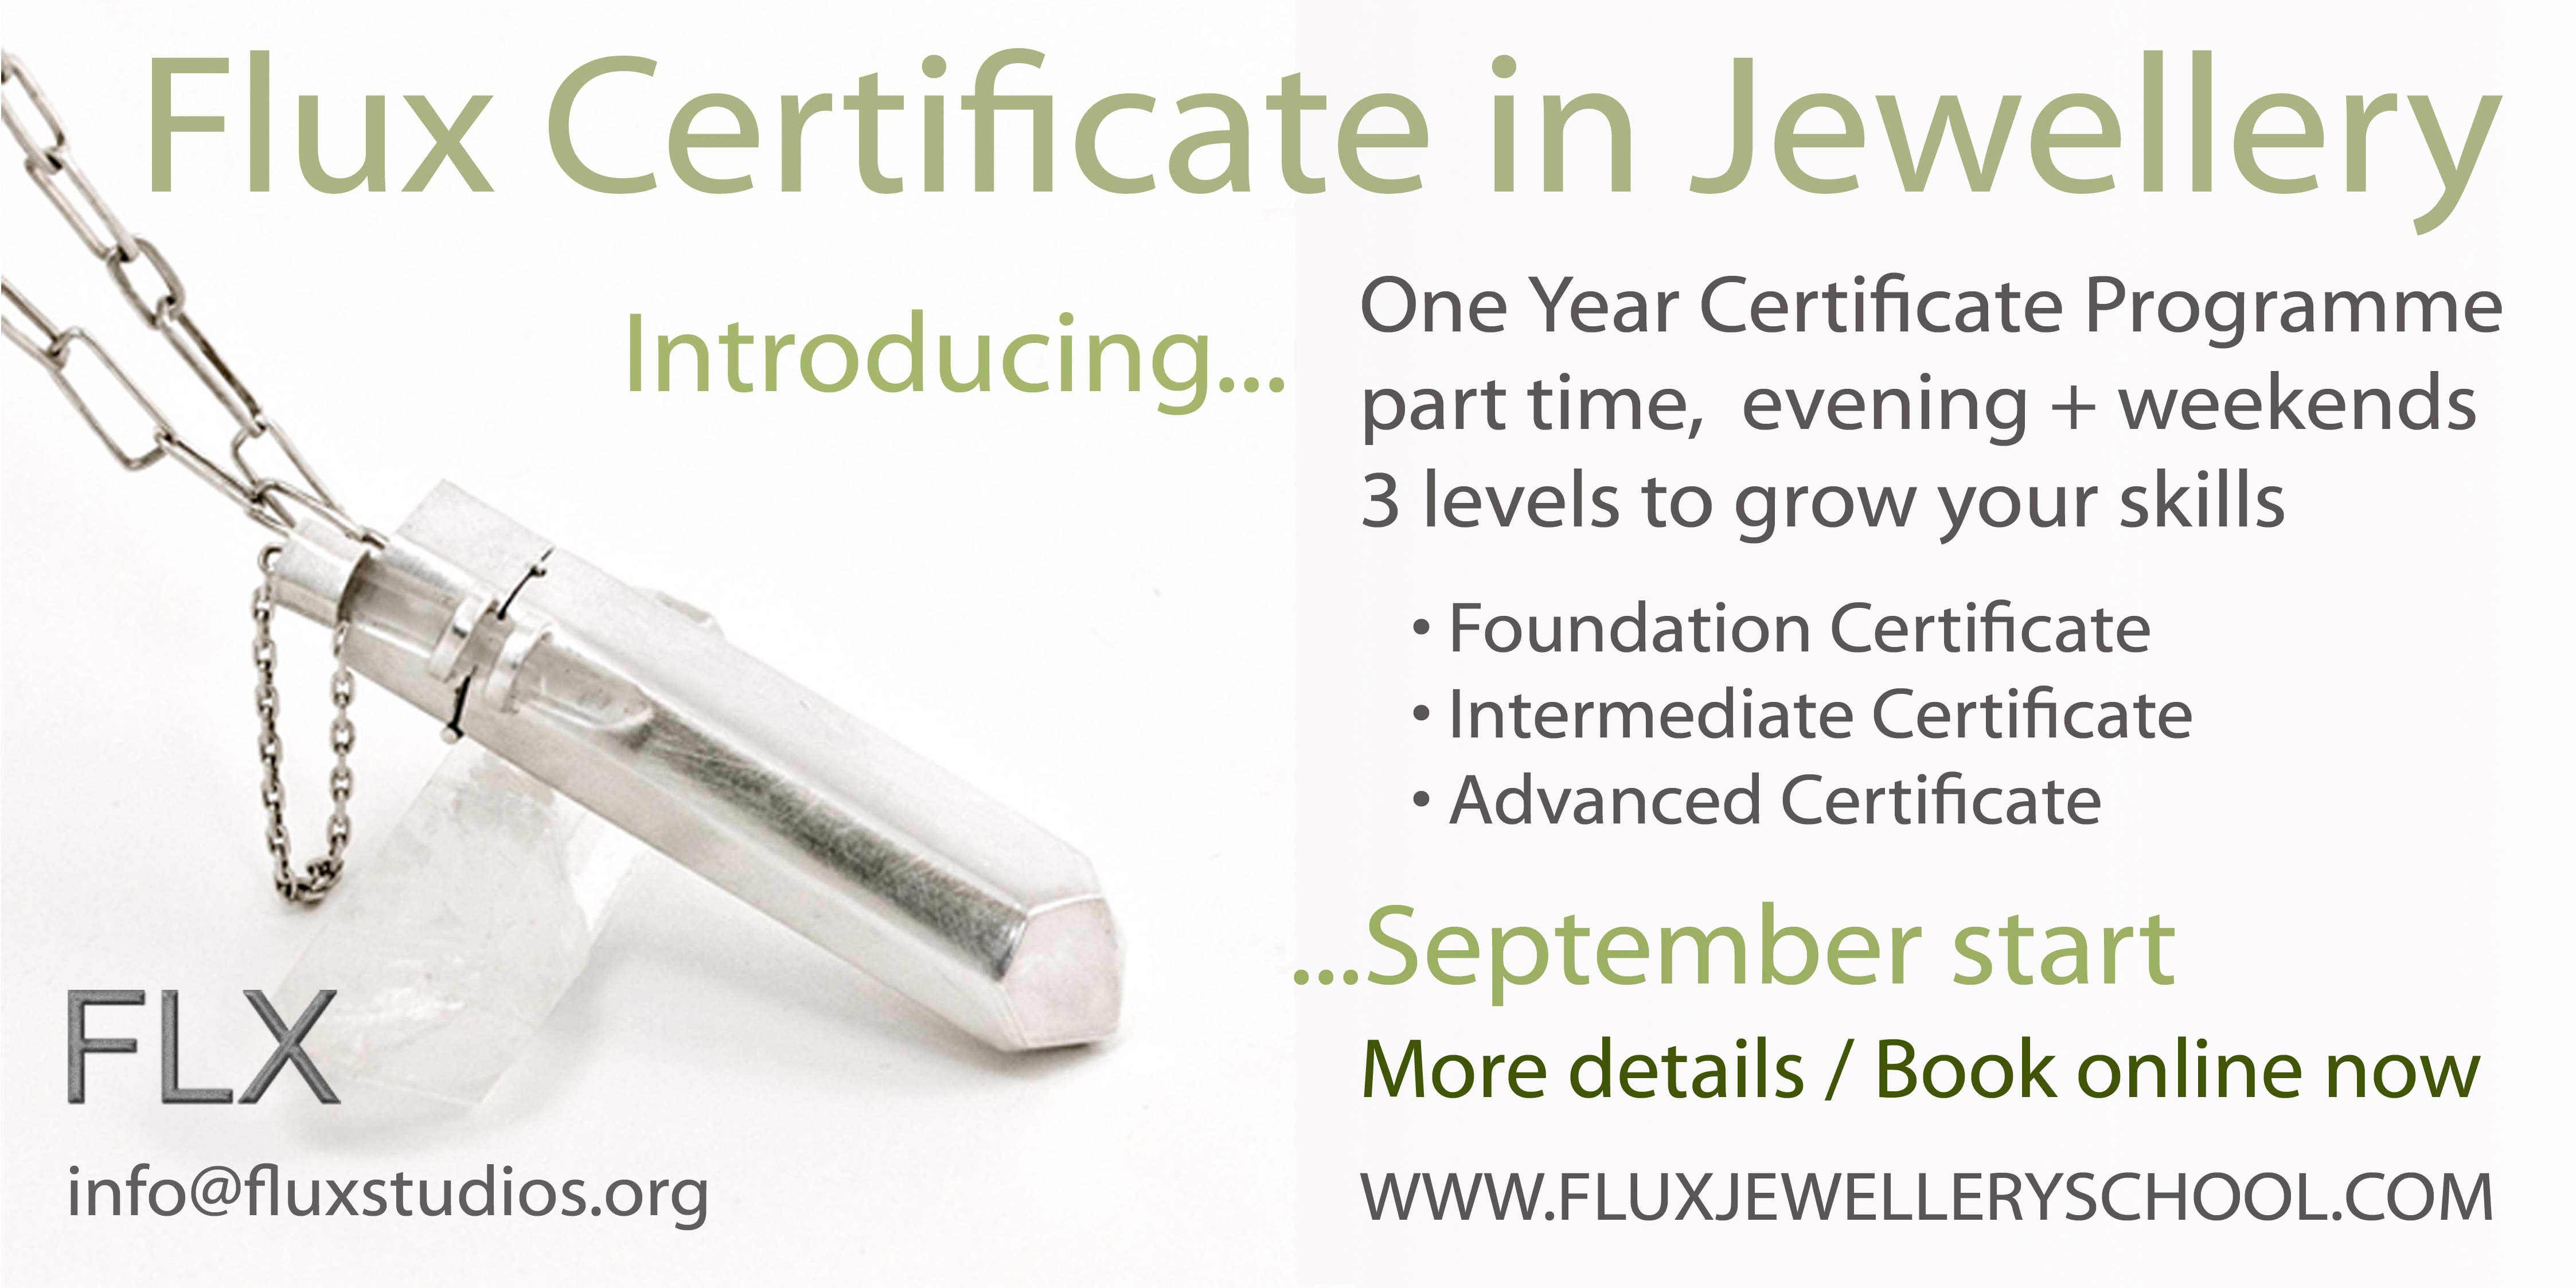 One year accredited course in jewellery making